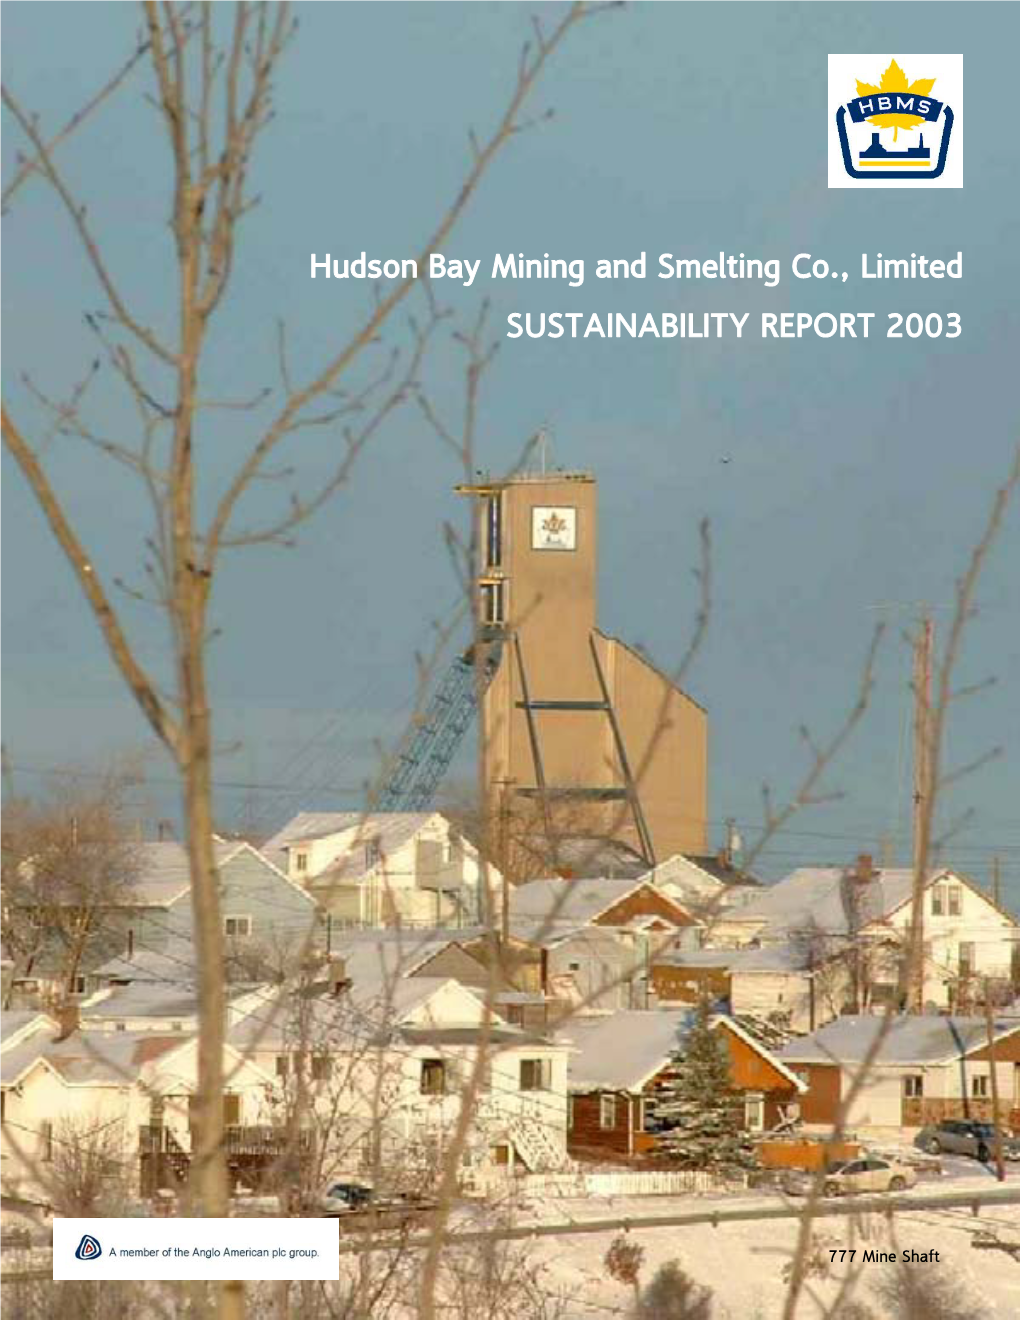 Hudson Bay Mining and Smelting Co., Limited SUSTAINABILITY REPORT 2003